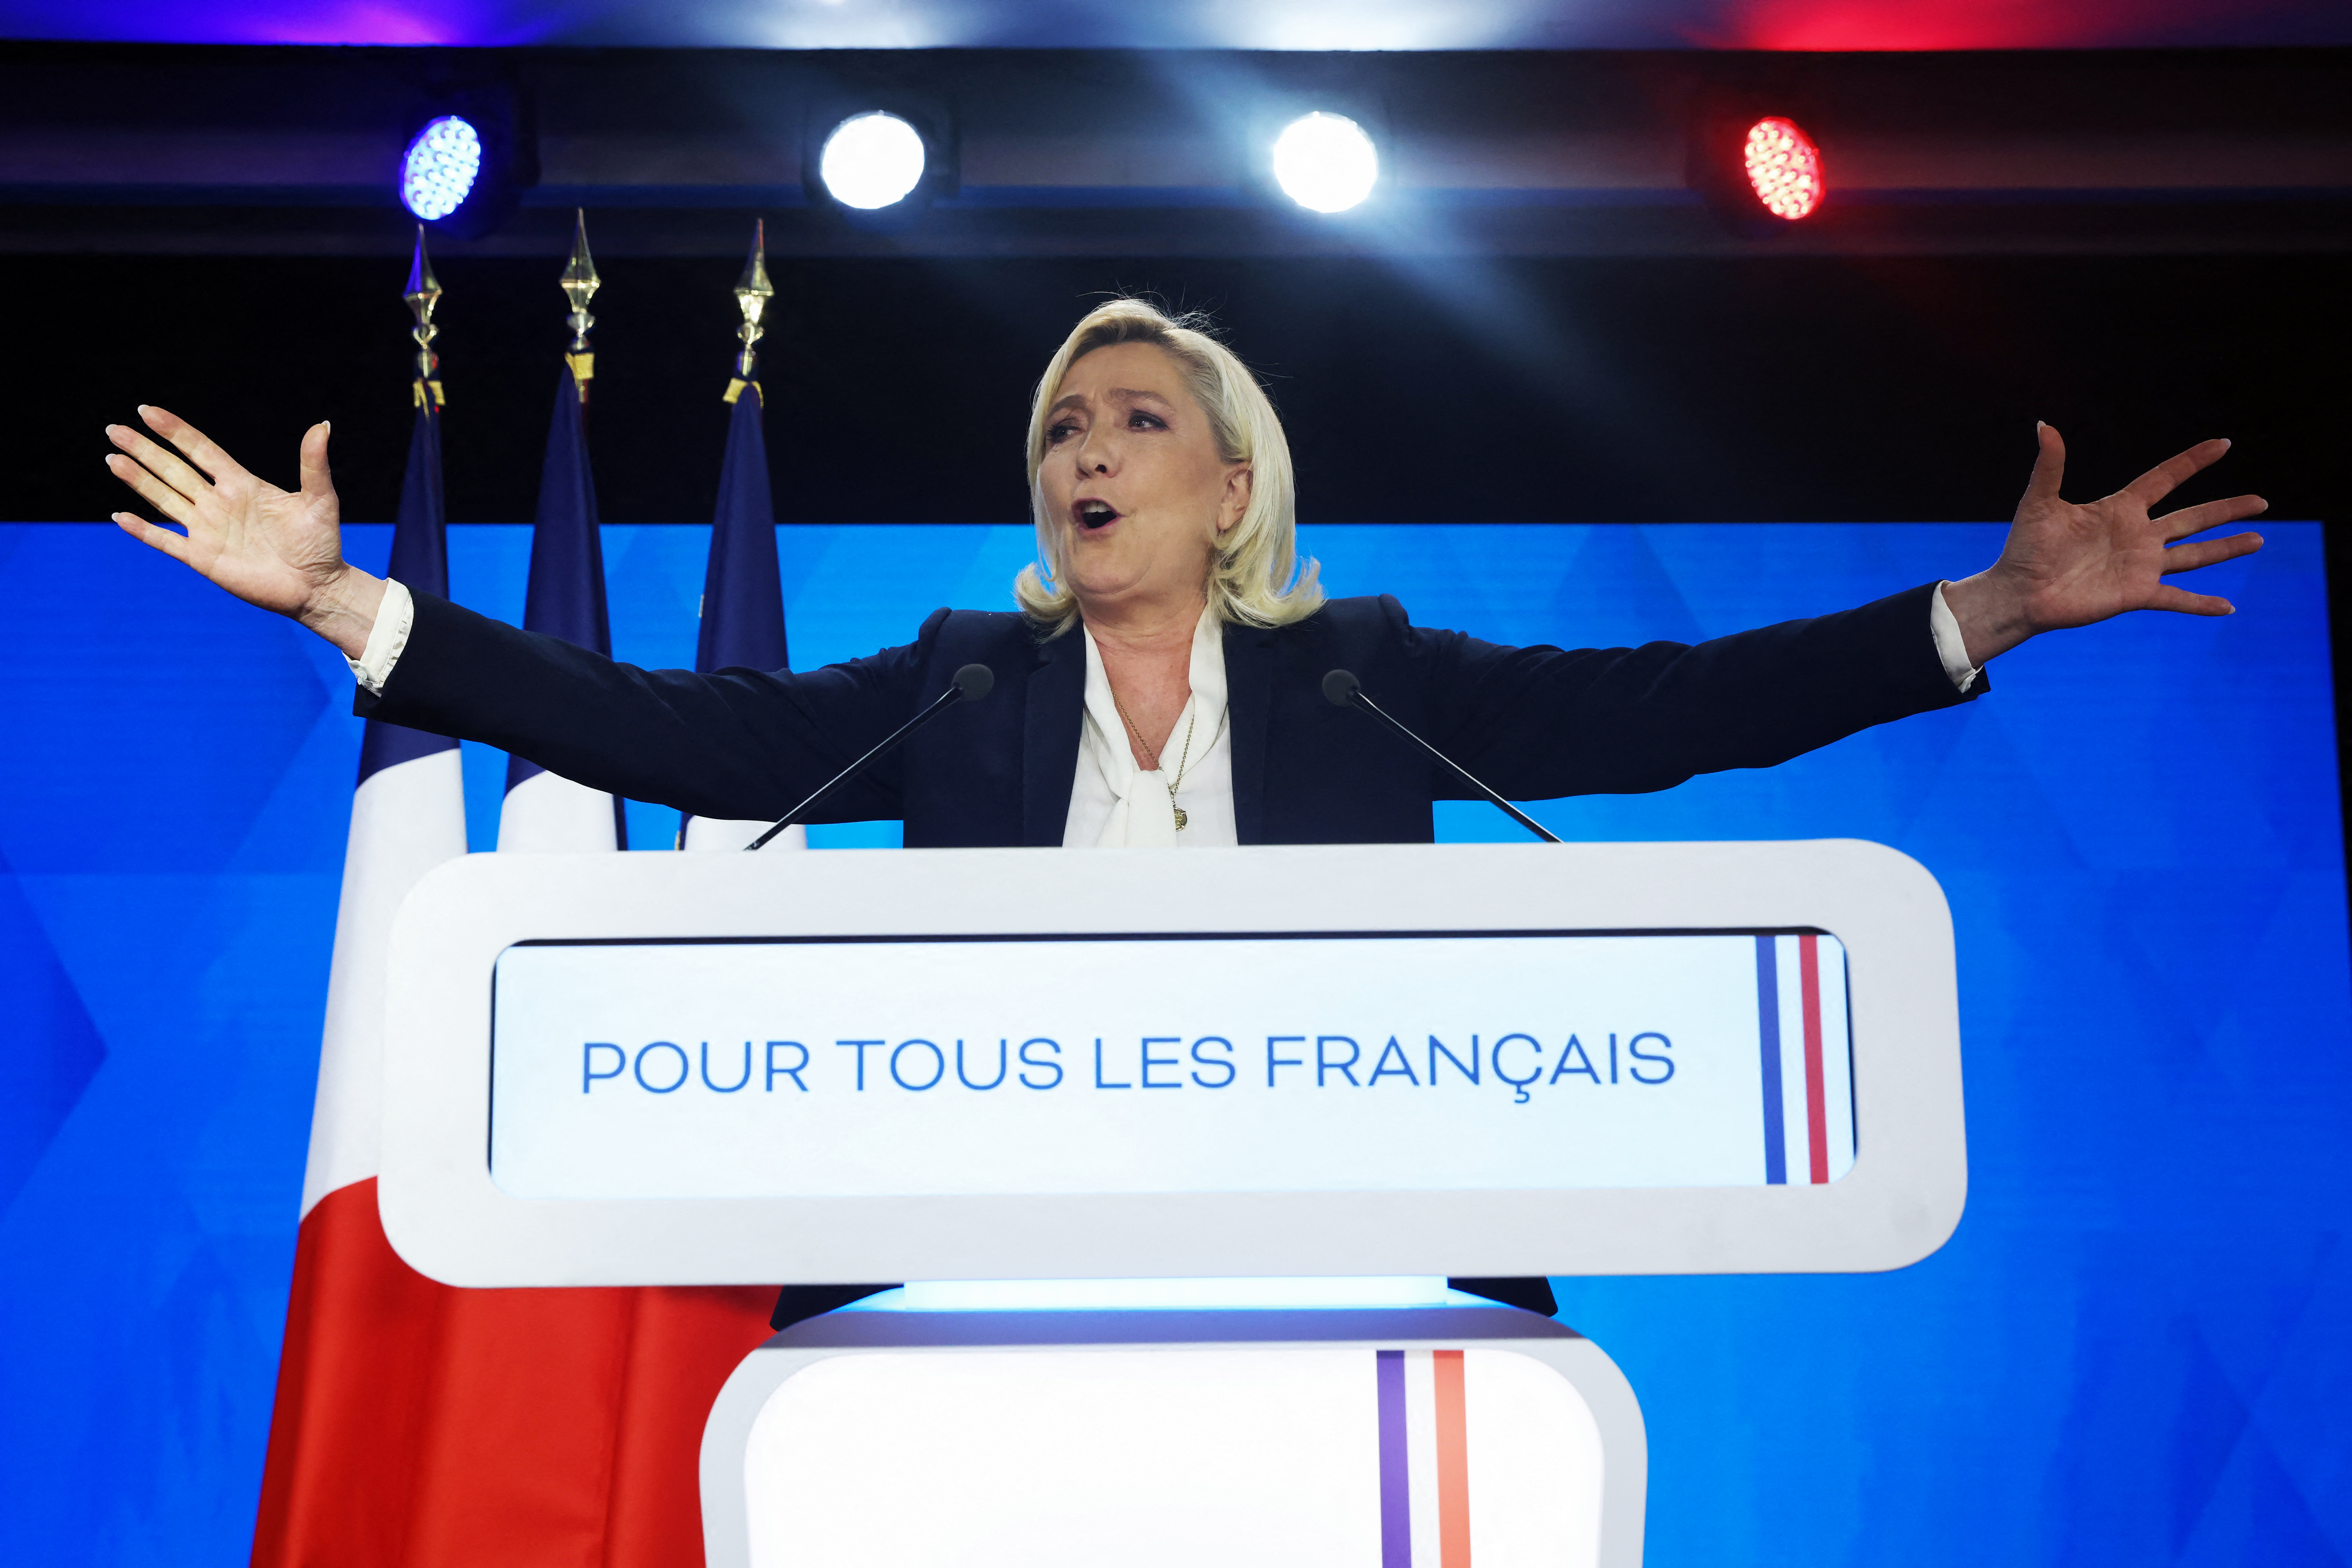 France's Marine Le Pen: Trump Win Shows Power Slipping From 'Elites